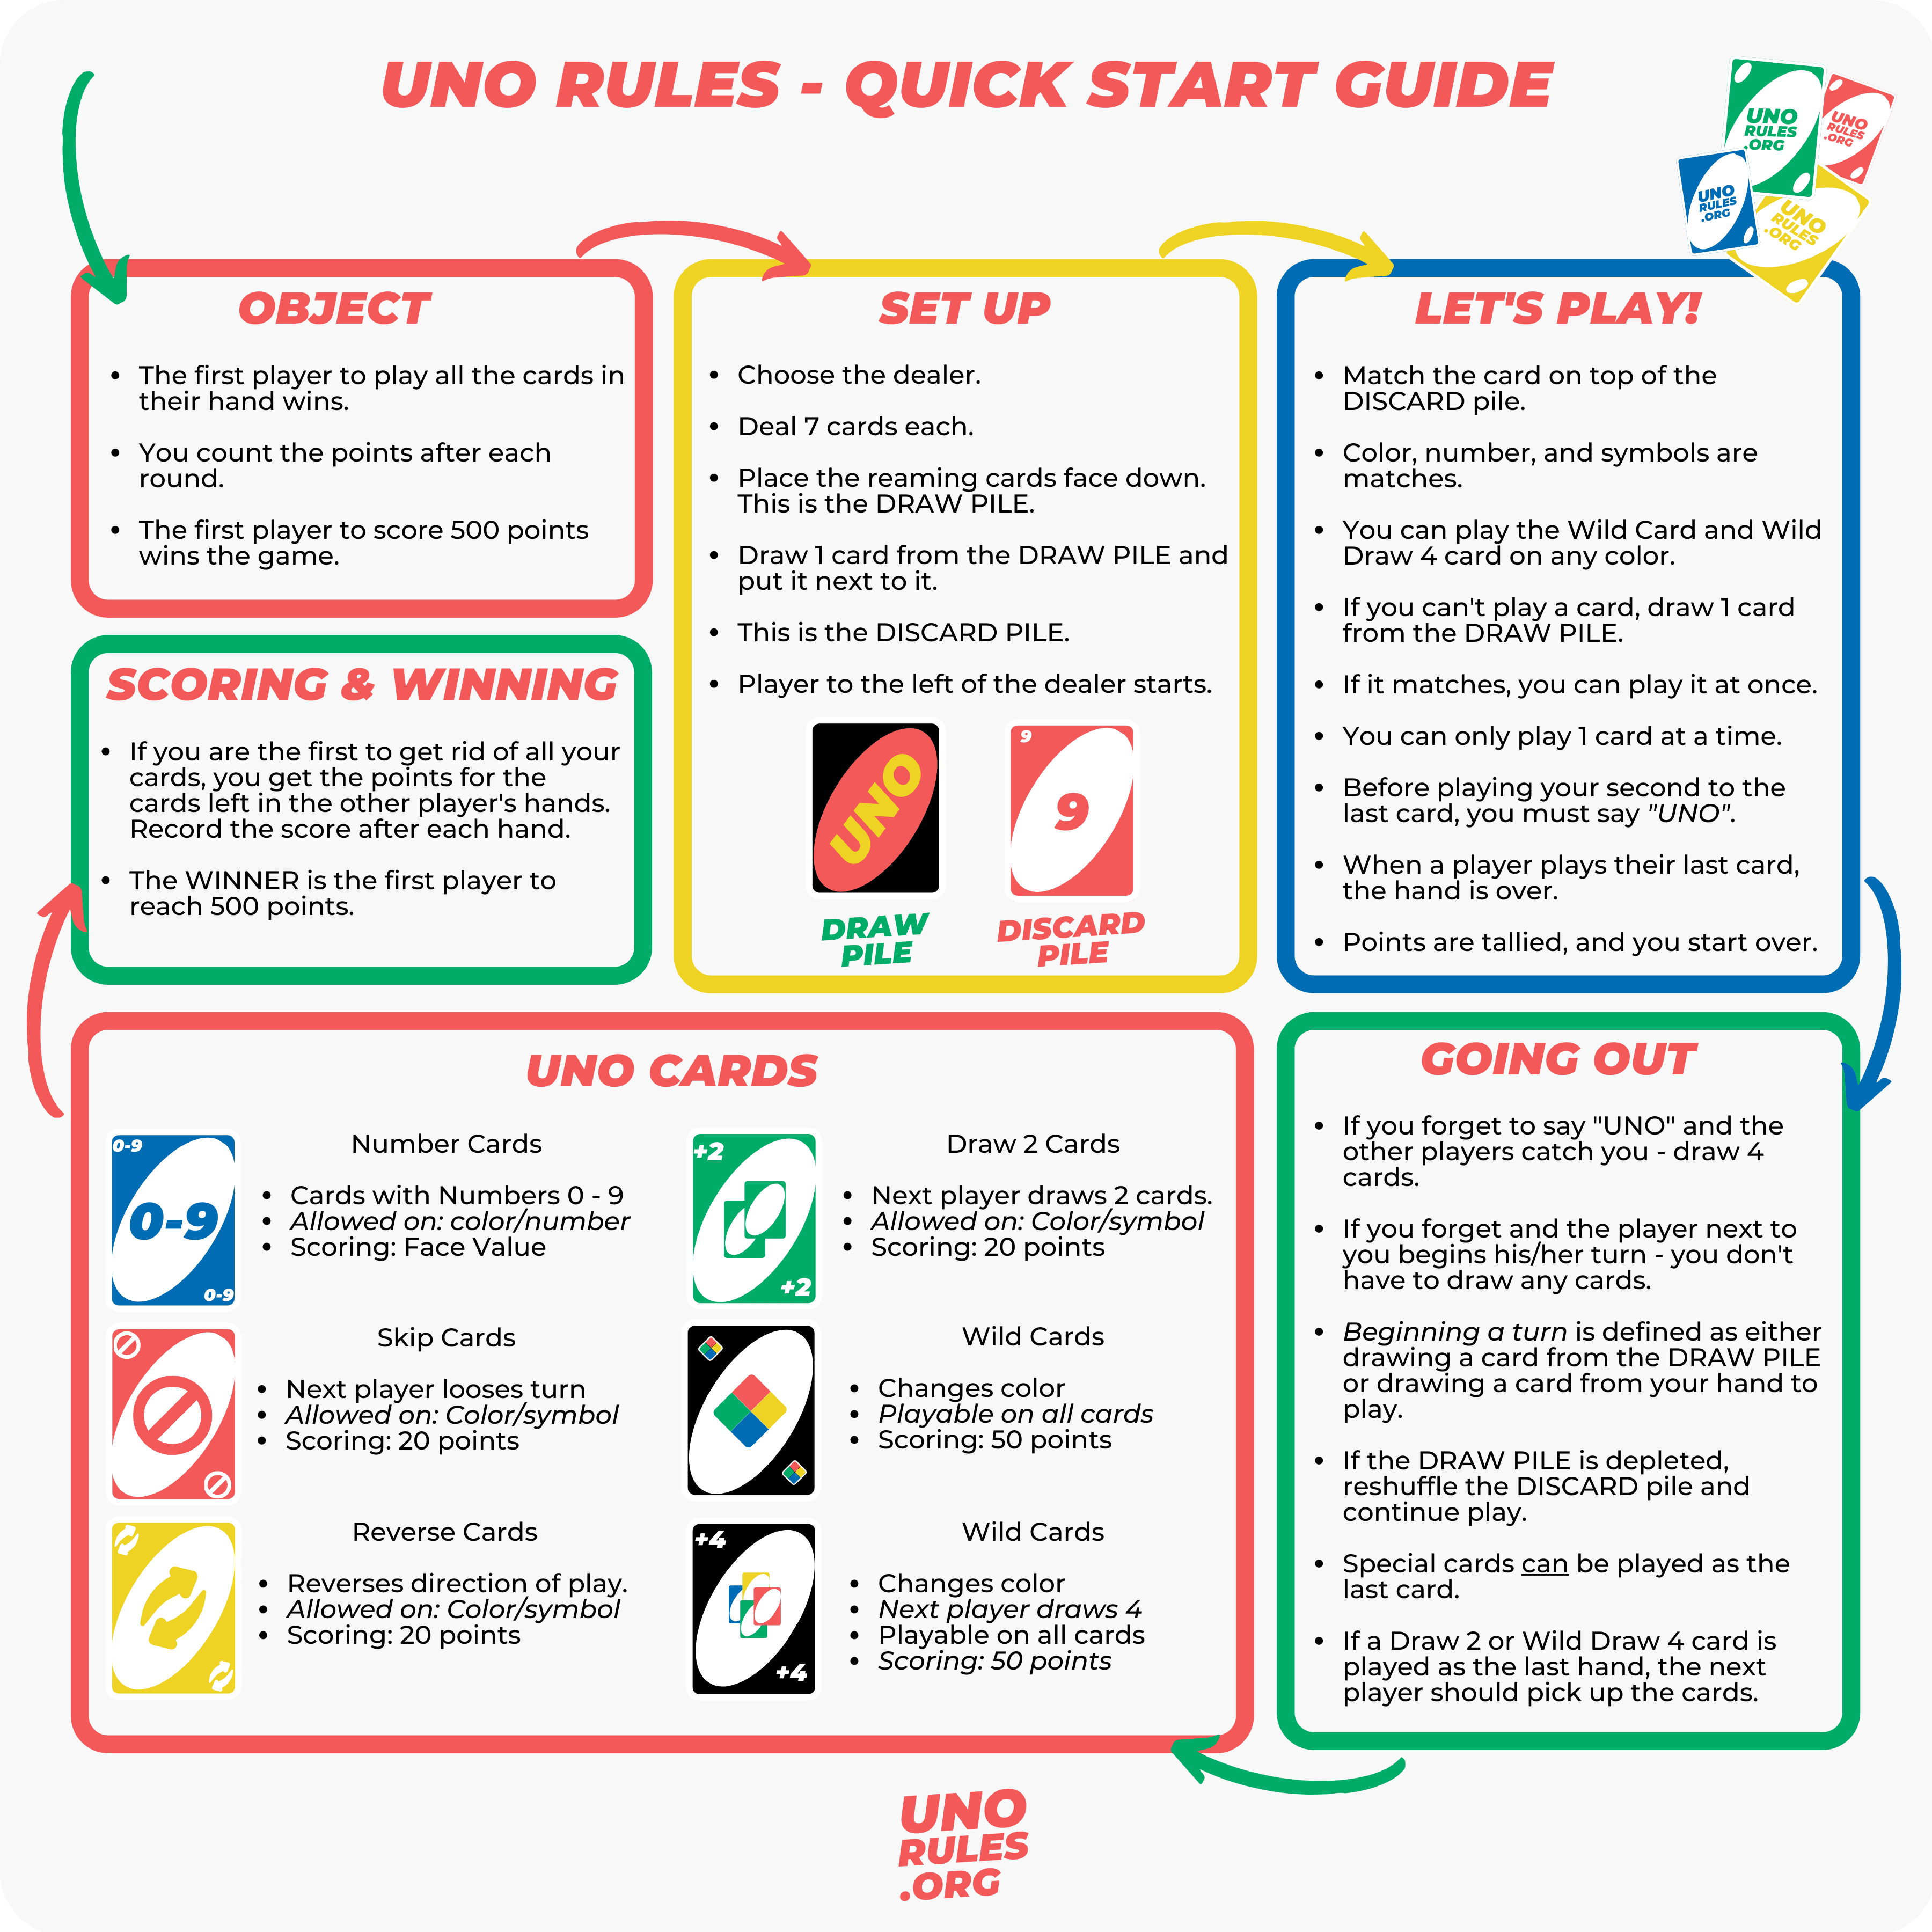 How to play UNO | Official Rules | UltraBoardGames